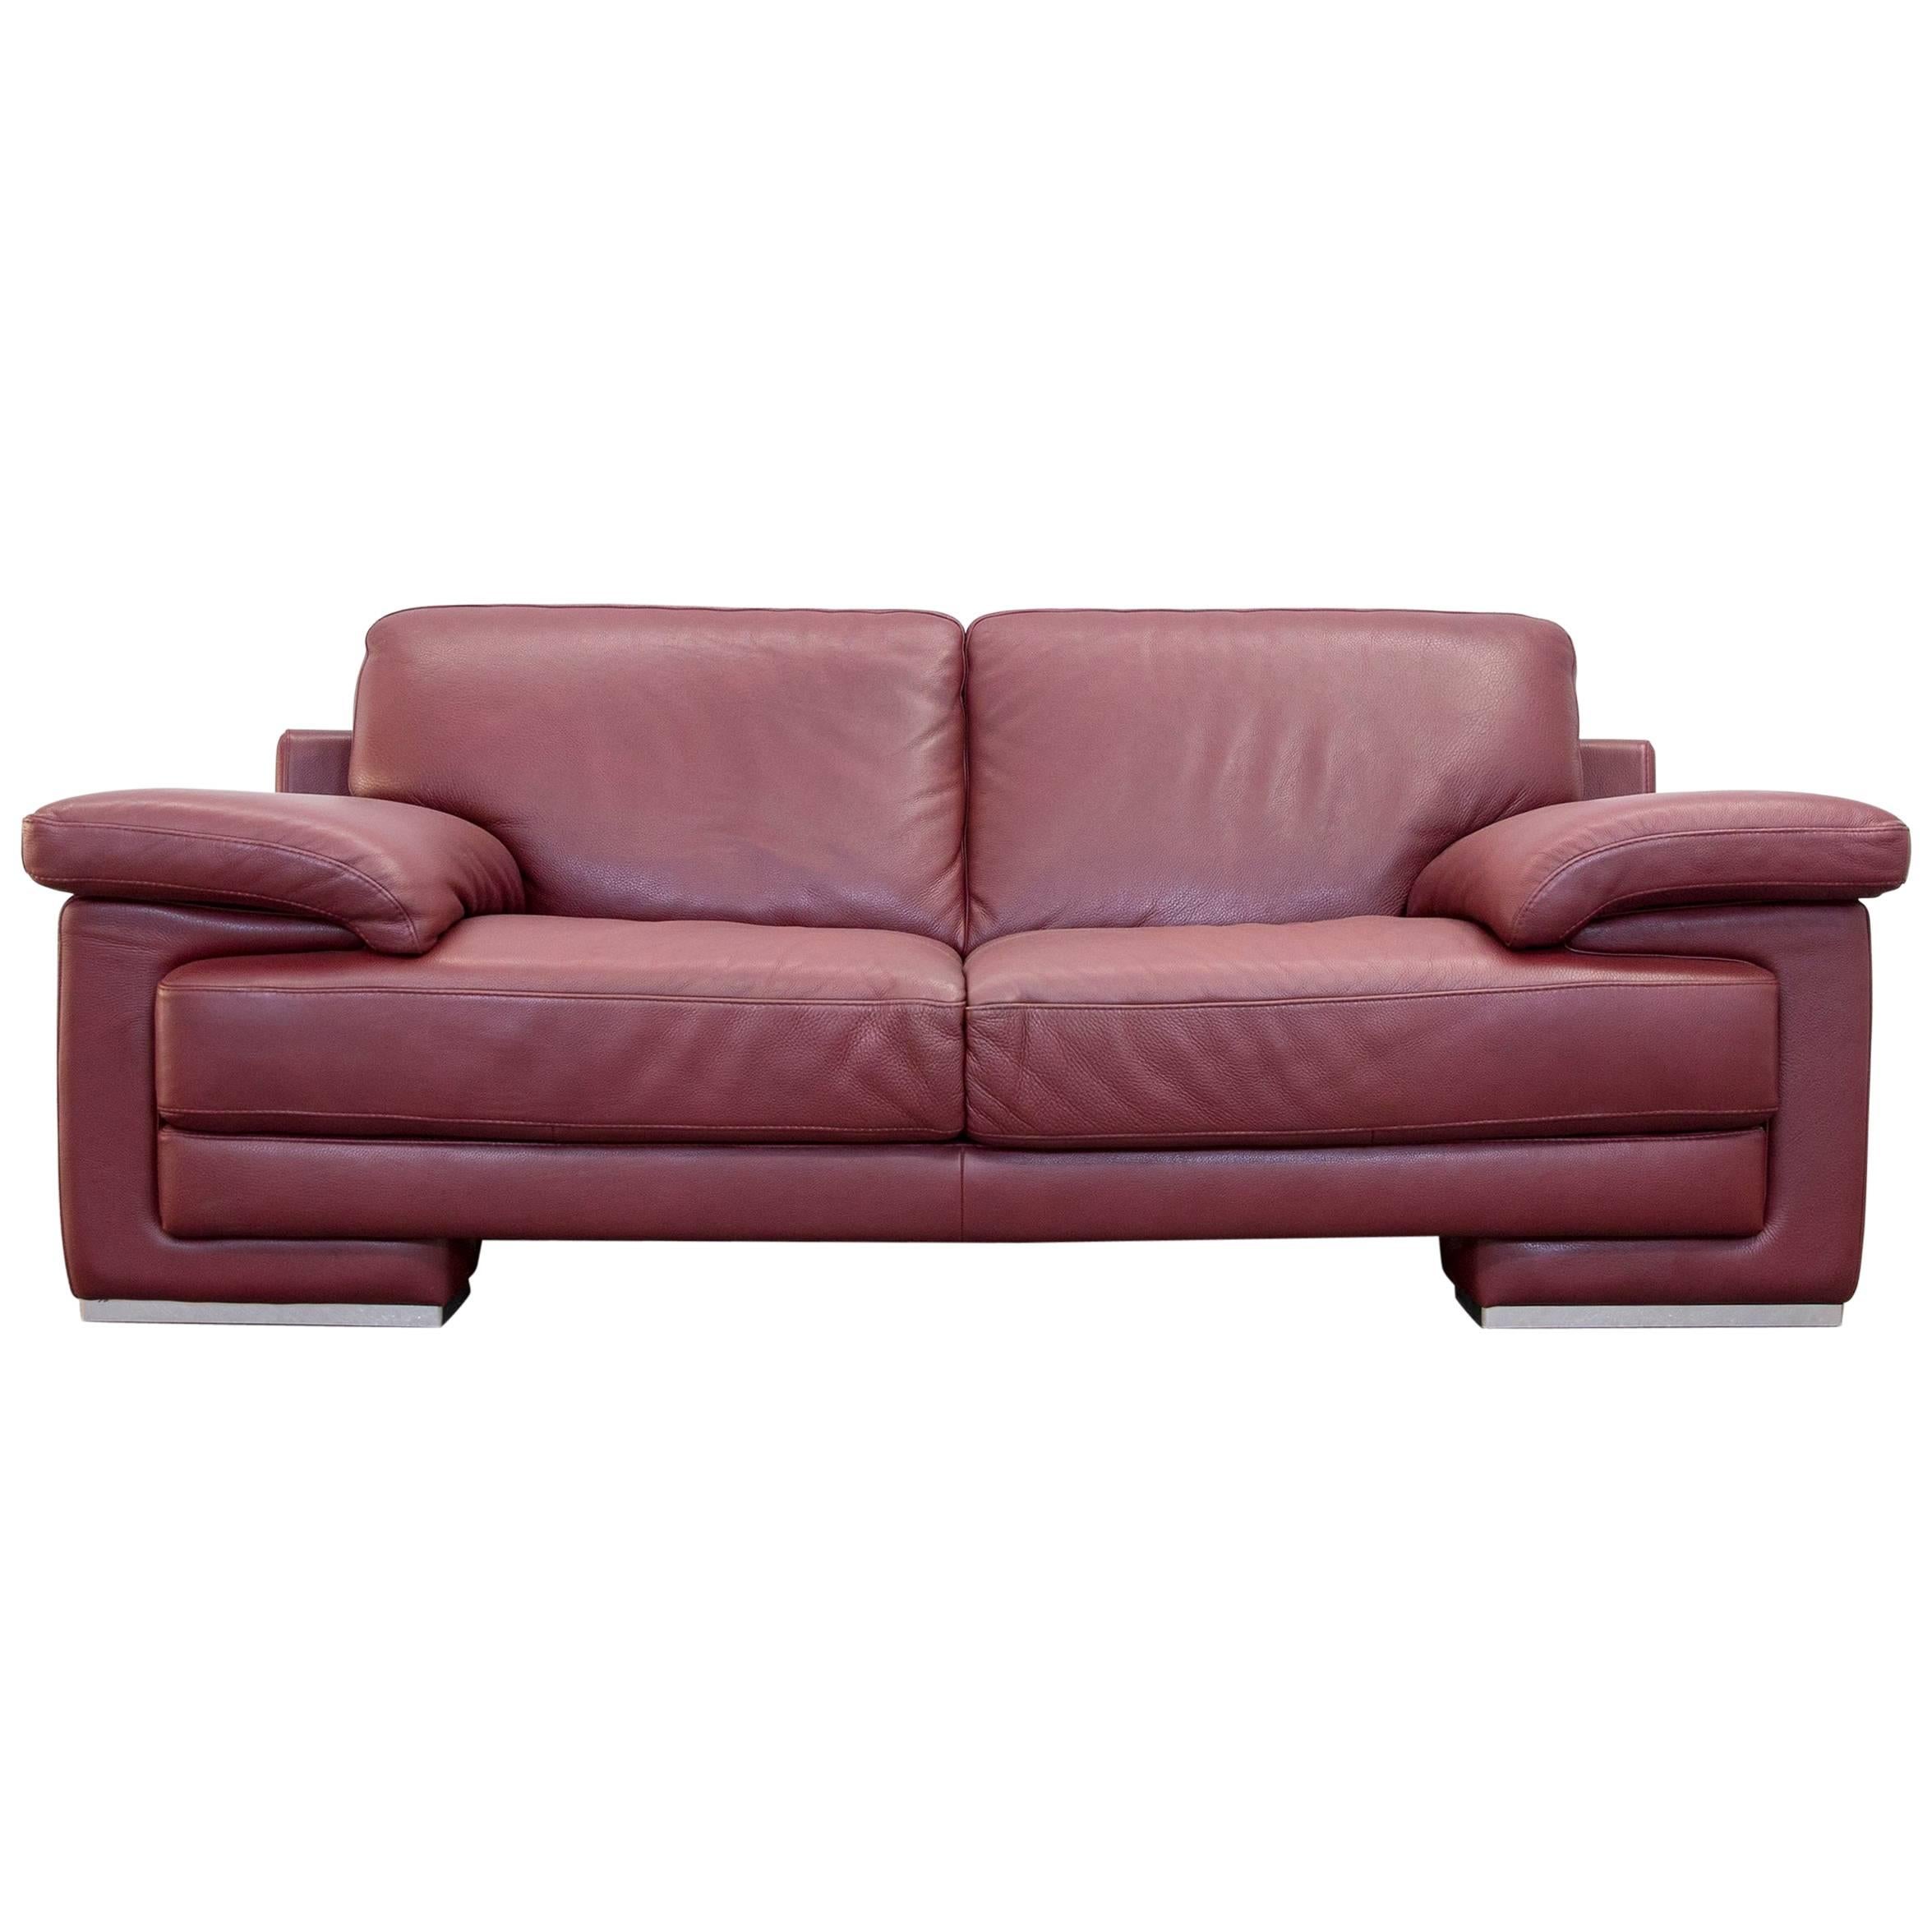 Natuzzi Designer Leather Three-Seat Couch Red